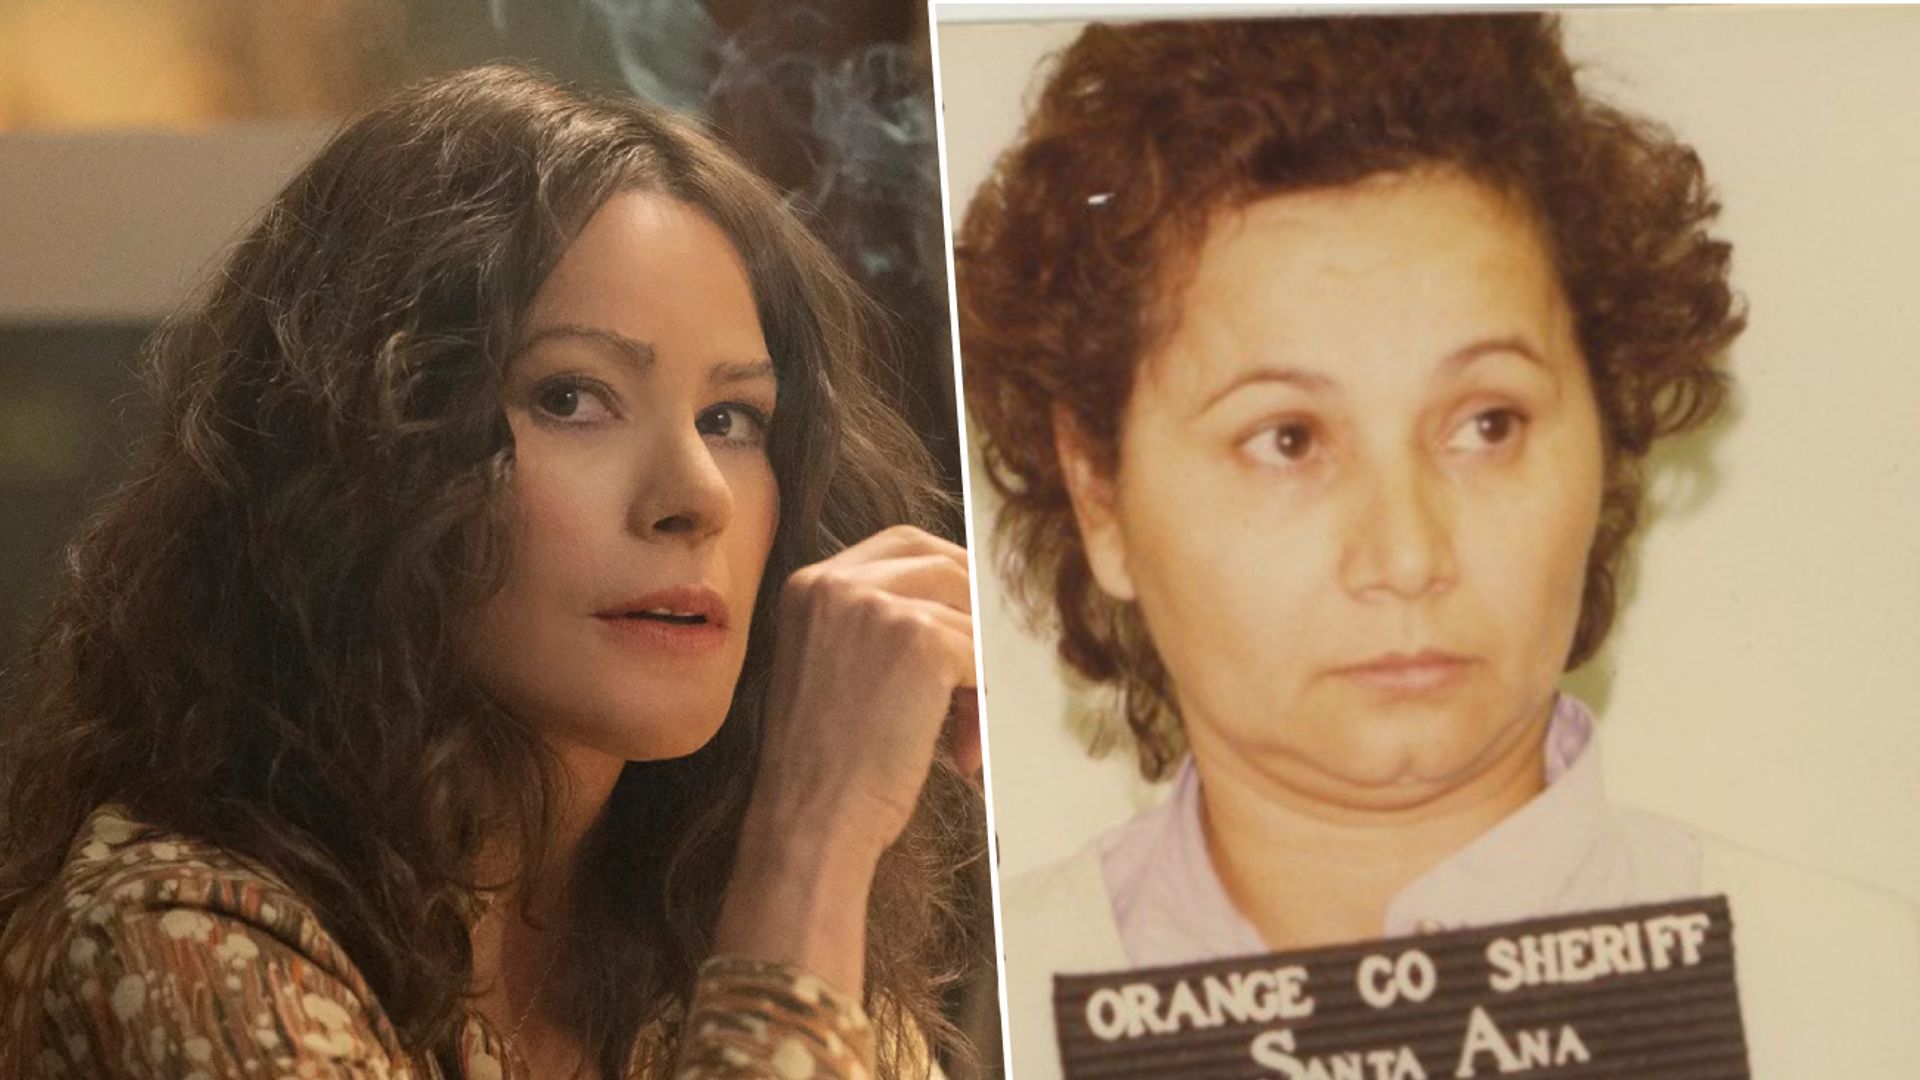 On the left is a picture of Sofia Vergara as Griselda Blanco, on the right is a picture of Griselda in 1985 as she has her mugshot taken